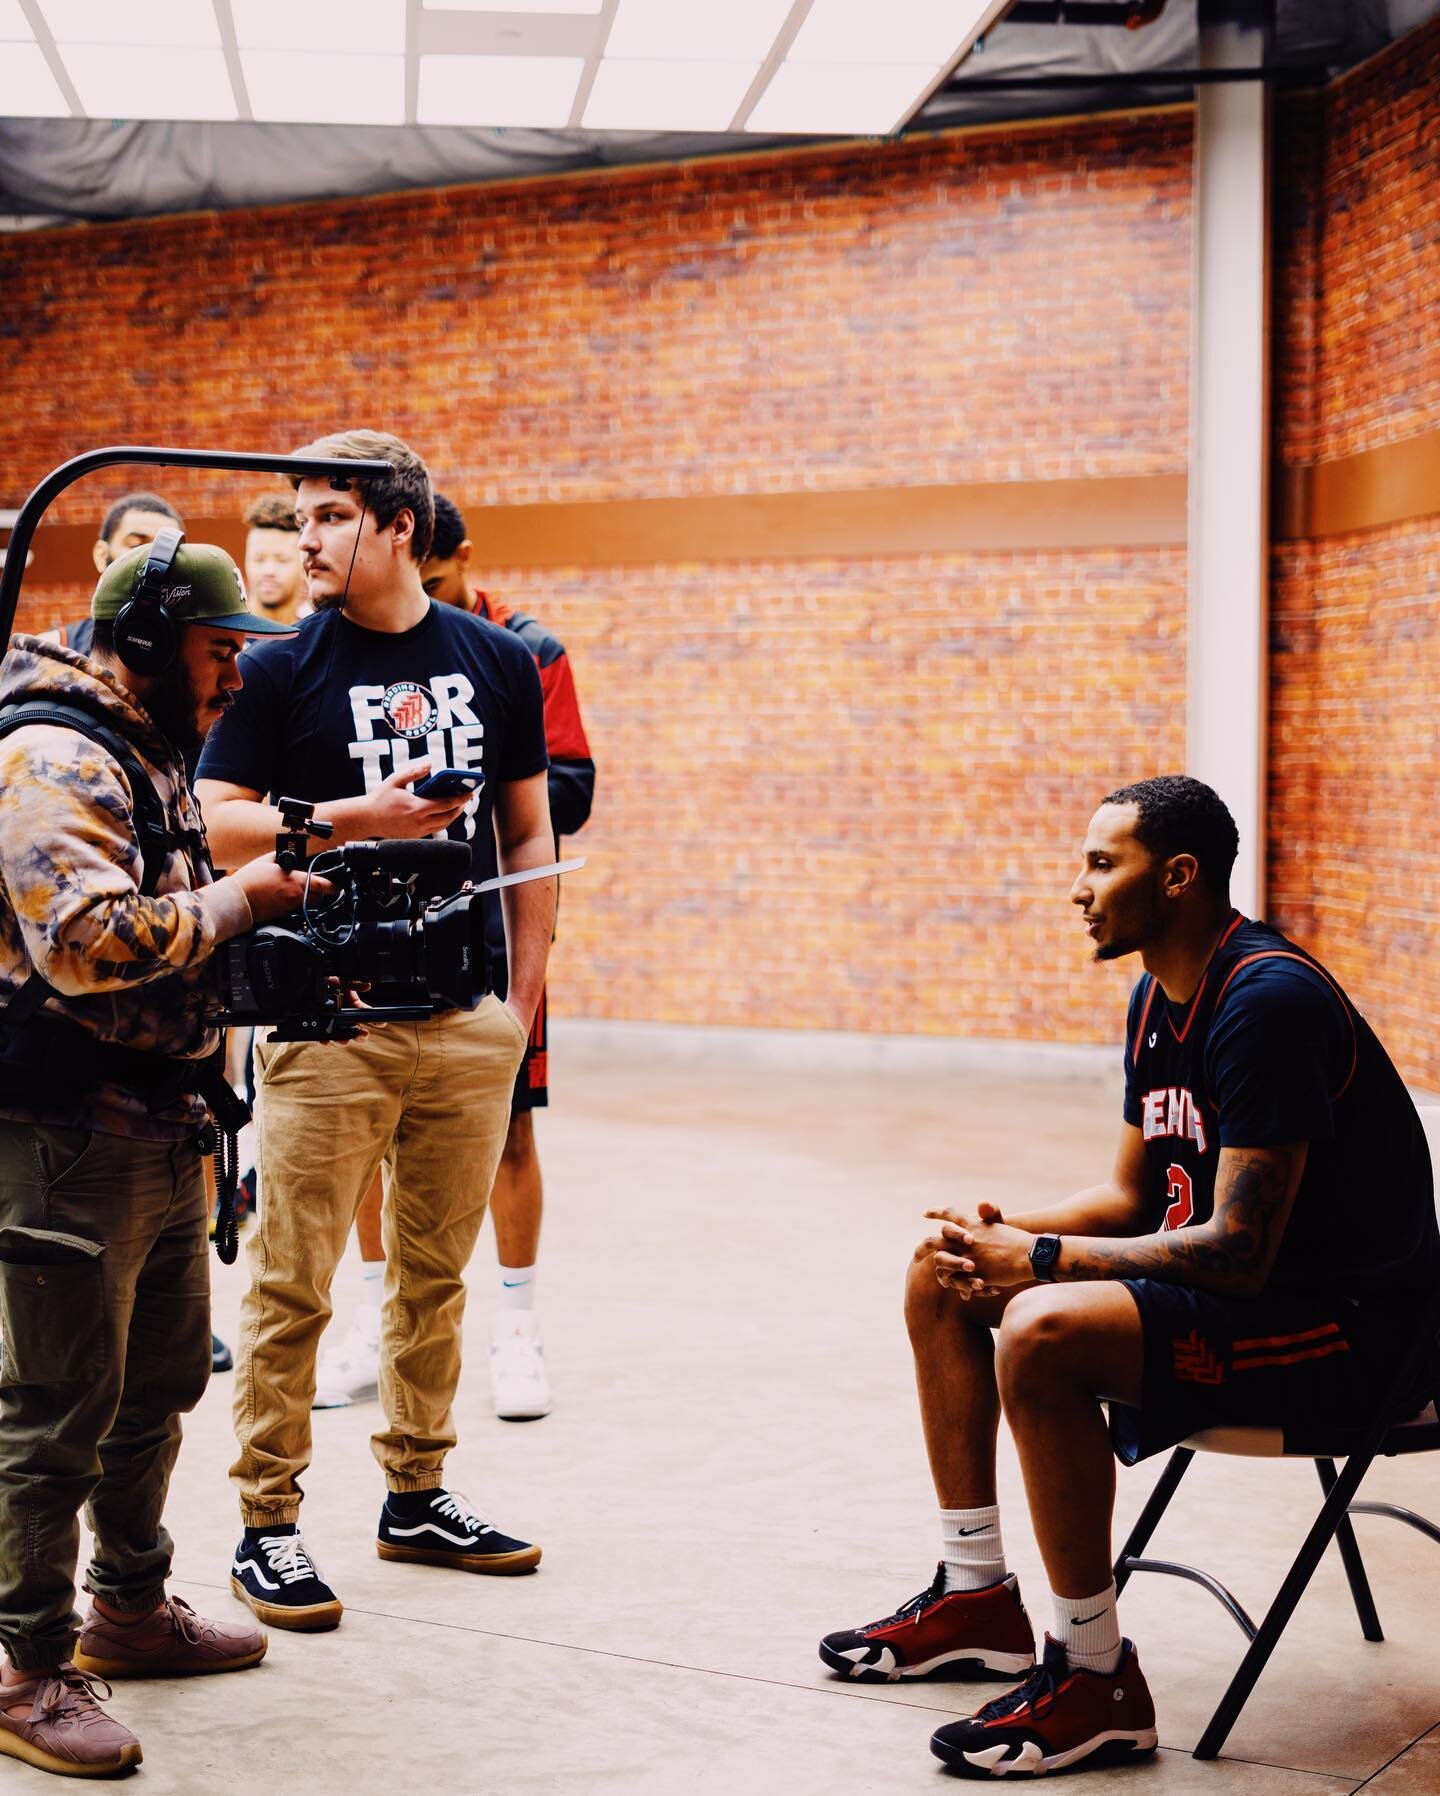 Some behind the scenes a few weeks back shooting some media interviews and a hype video for the new professional @tbasketballleague in Reading the @readingrebelstbl !

The first day also filming with the @sonycine #fullframe fx6 with the @tiltaing ad